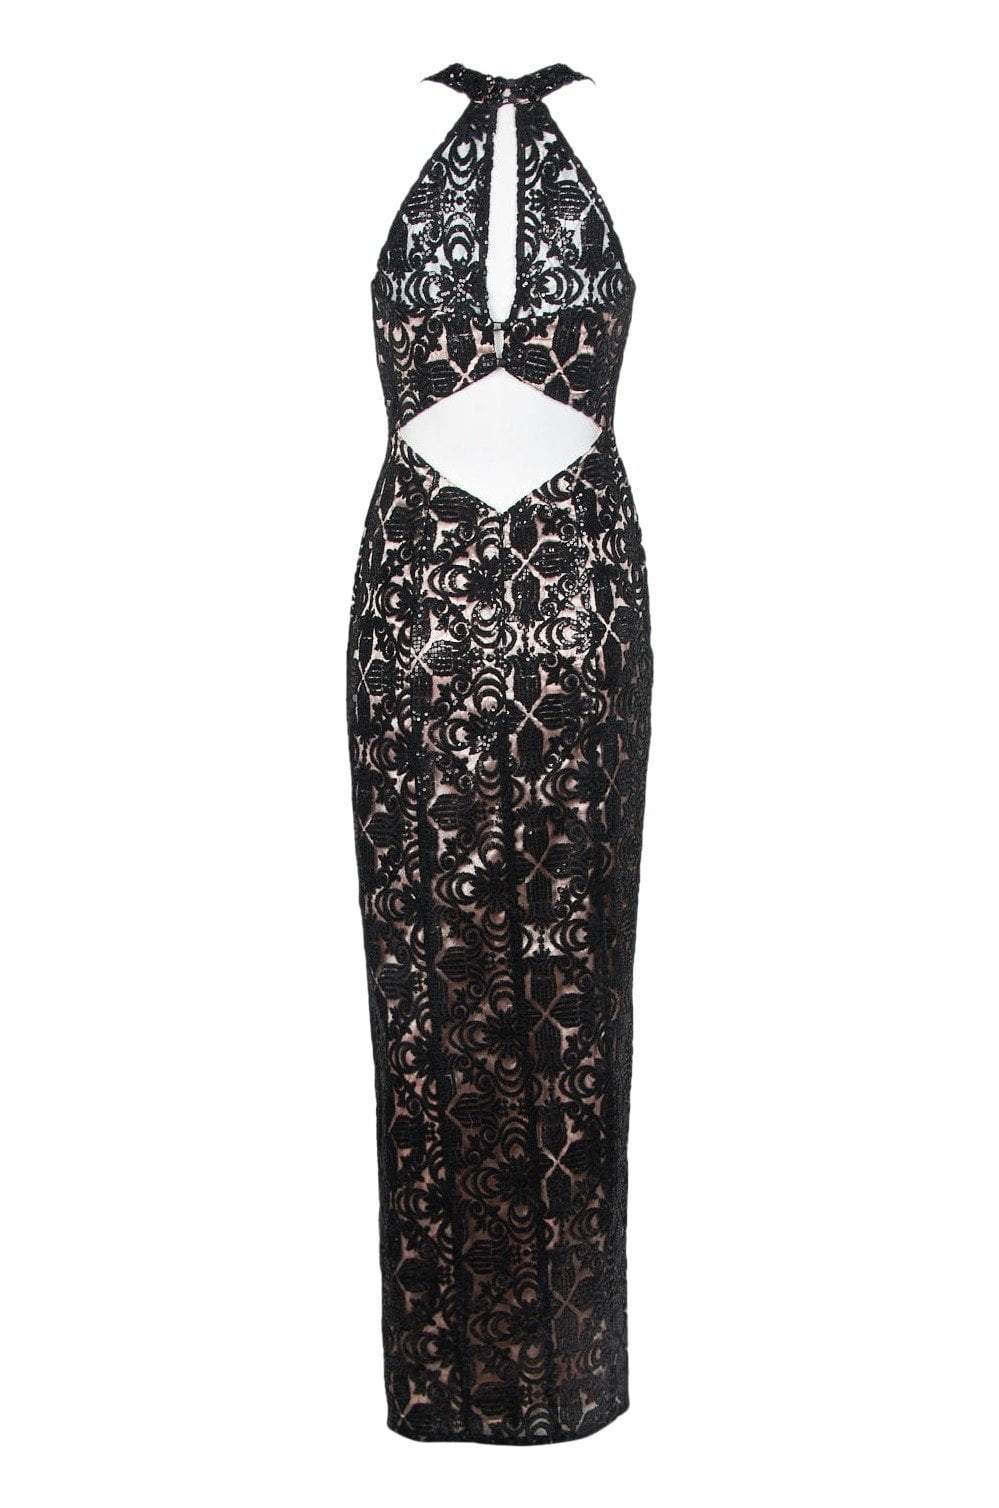 Decode 1.8 - 184400 Sequined Halter Dress with Back Cutouts In Black and Pink